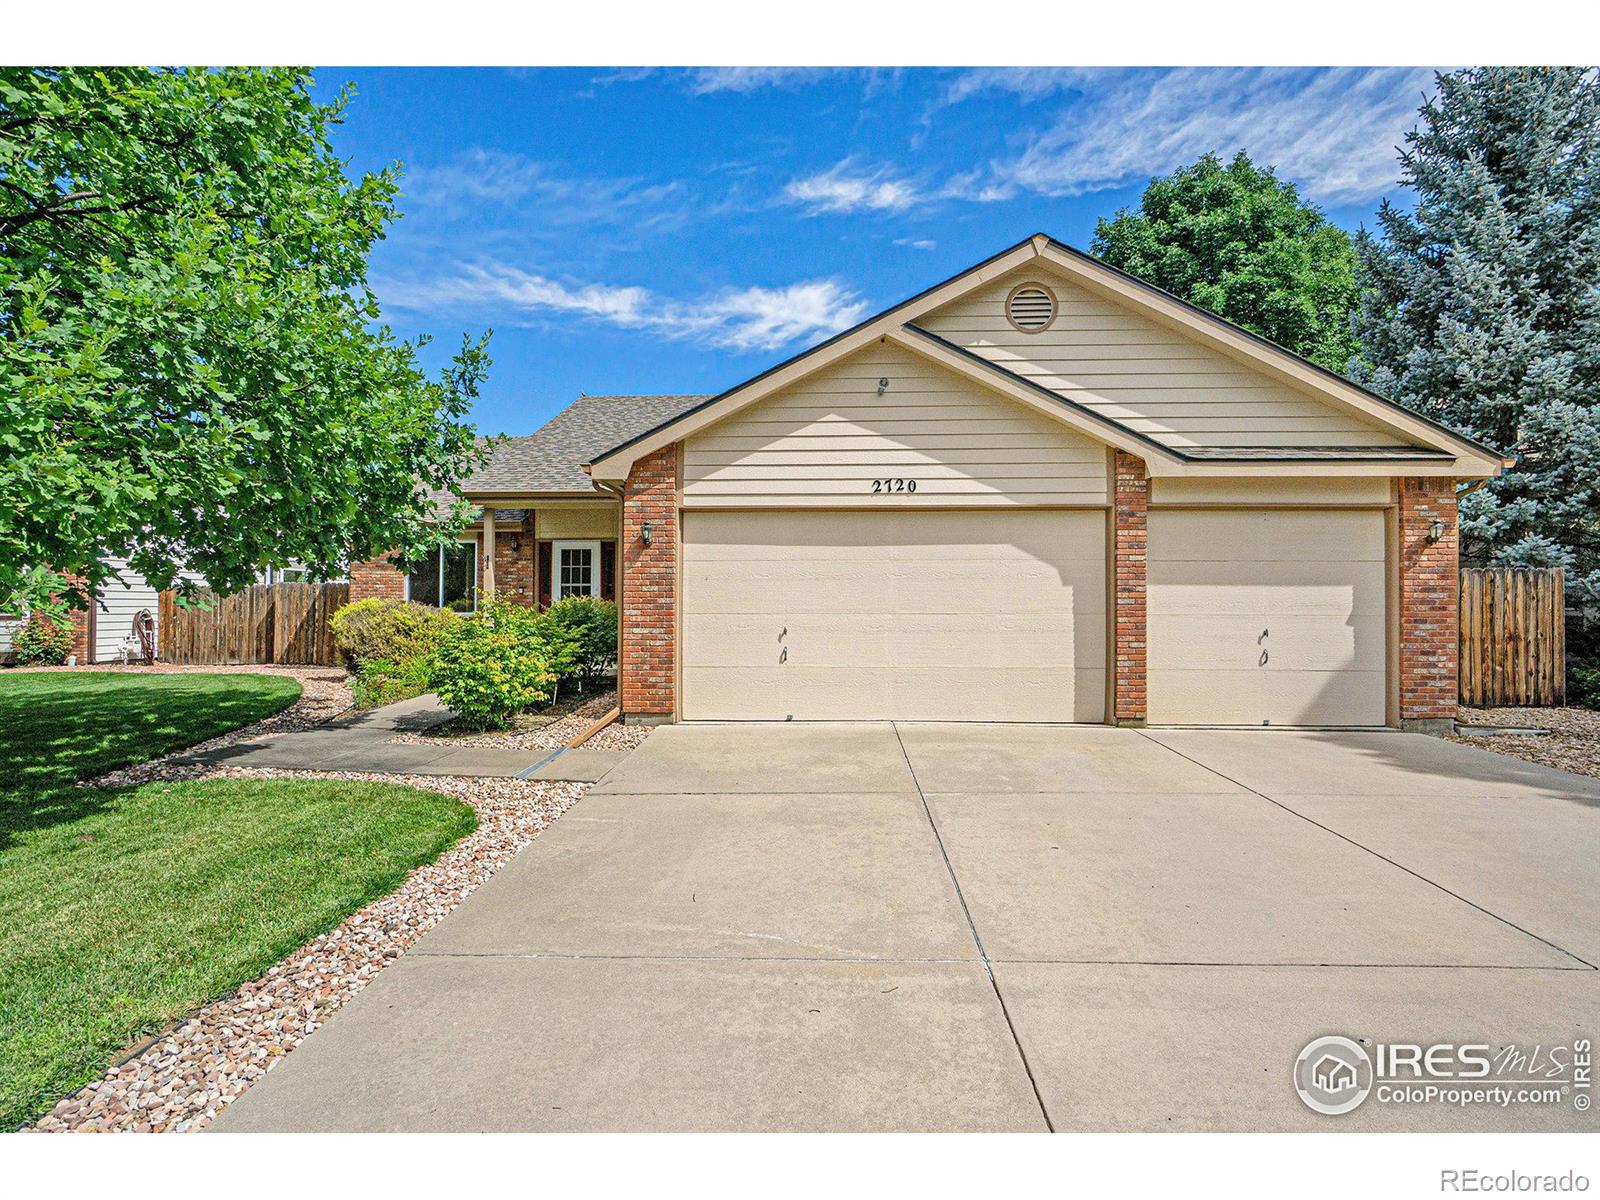 2720  Stonehaven Drive, fort collins MLS: 456789993878 Beds: 3 Baths: 2 Price: $679,900